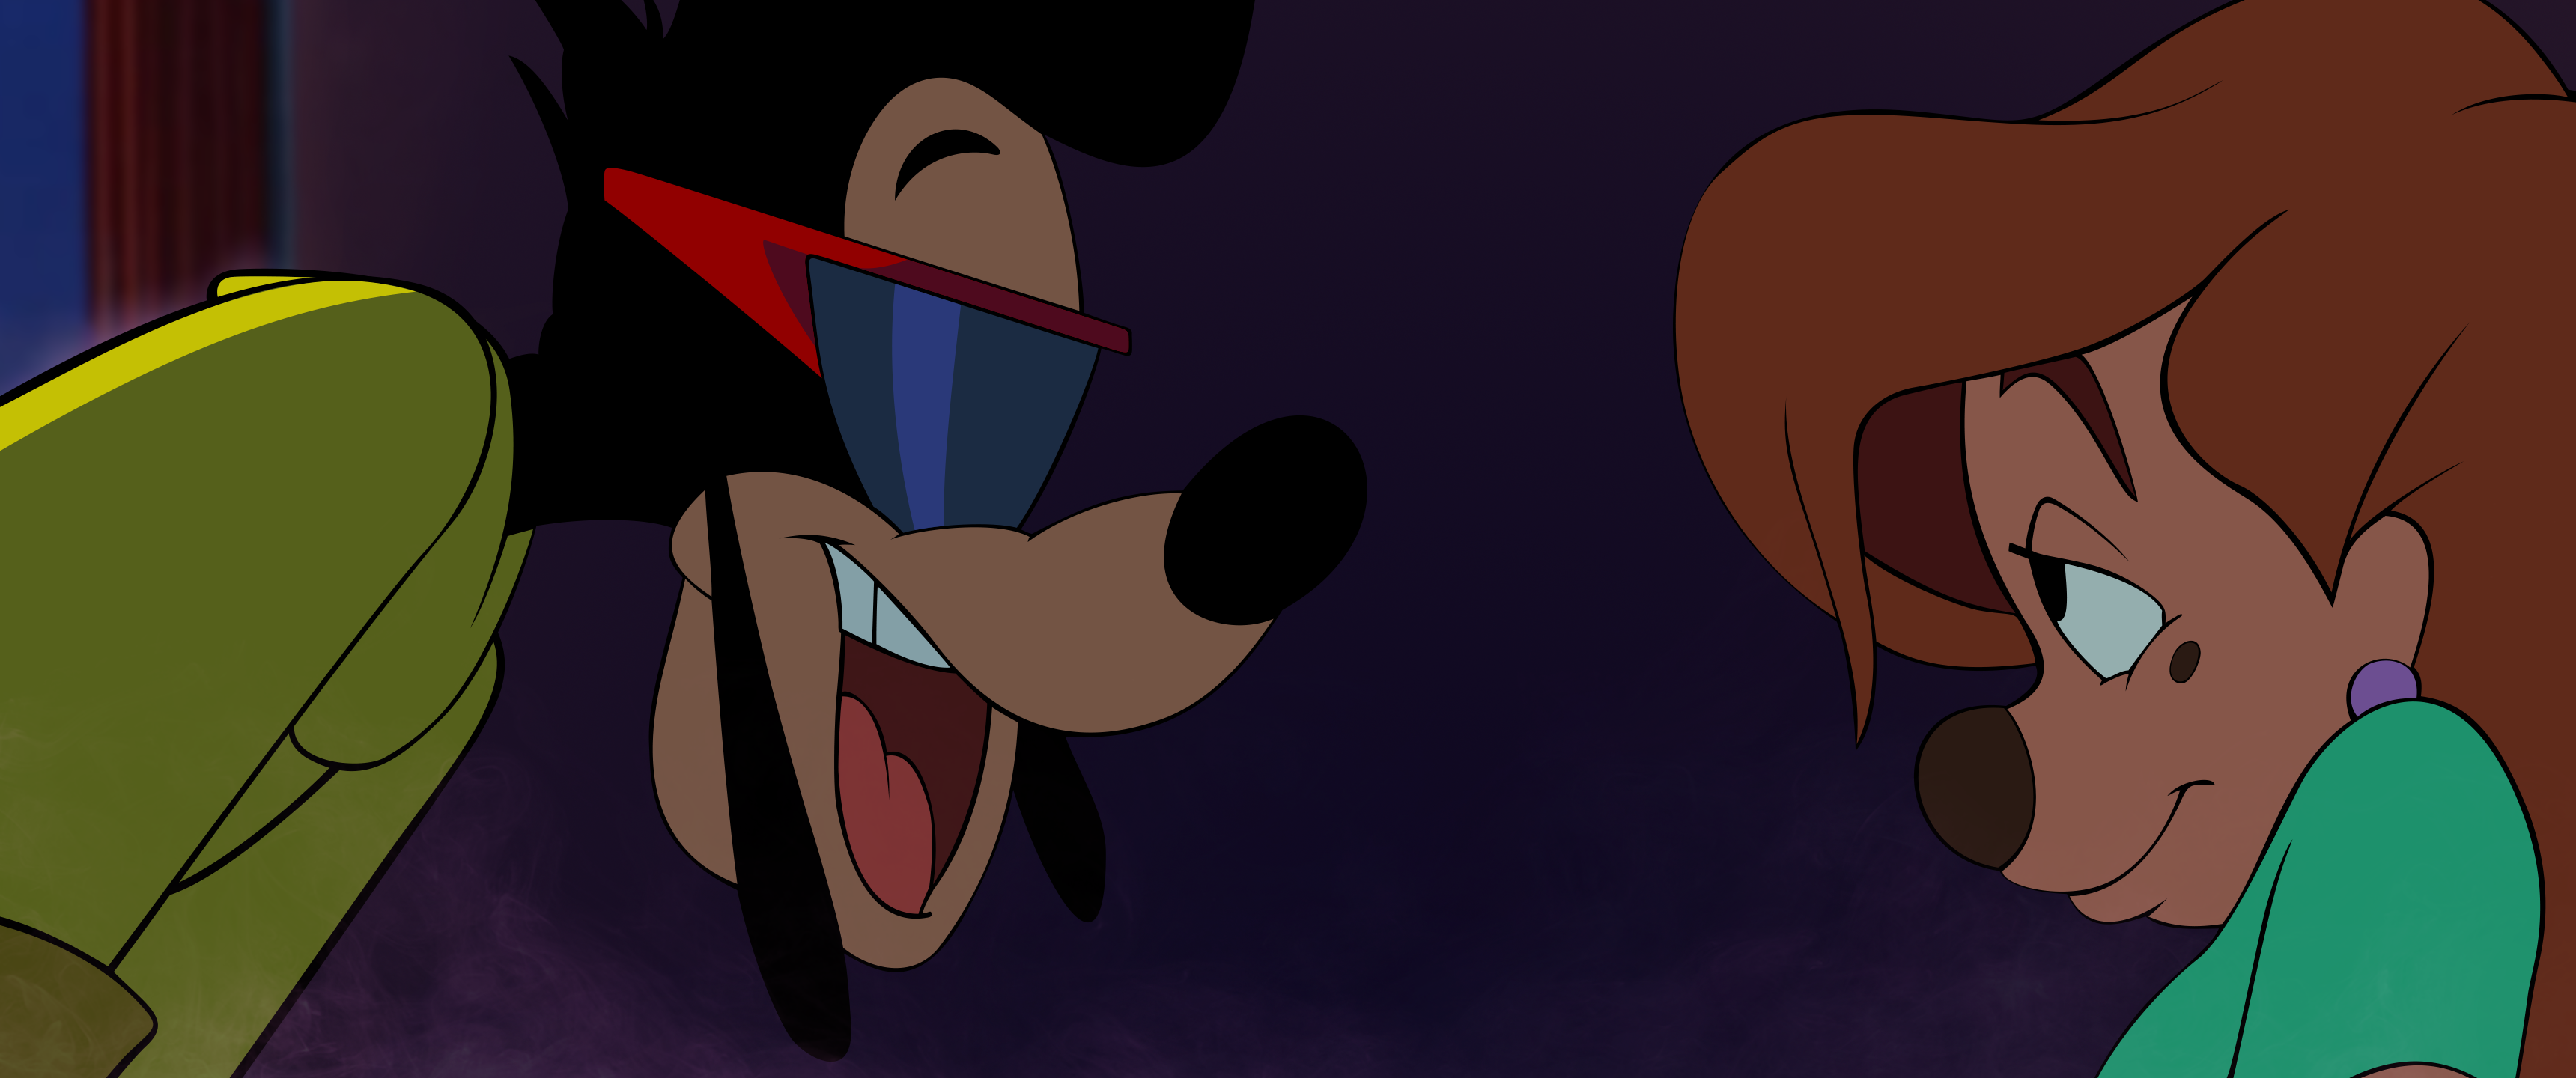 OC][3440x1440] Vectorized a Screenshot from the Goofy Movie to use as an Ultrawide Wallpaper